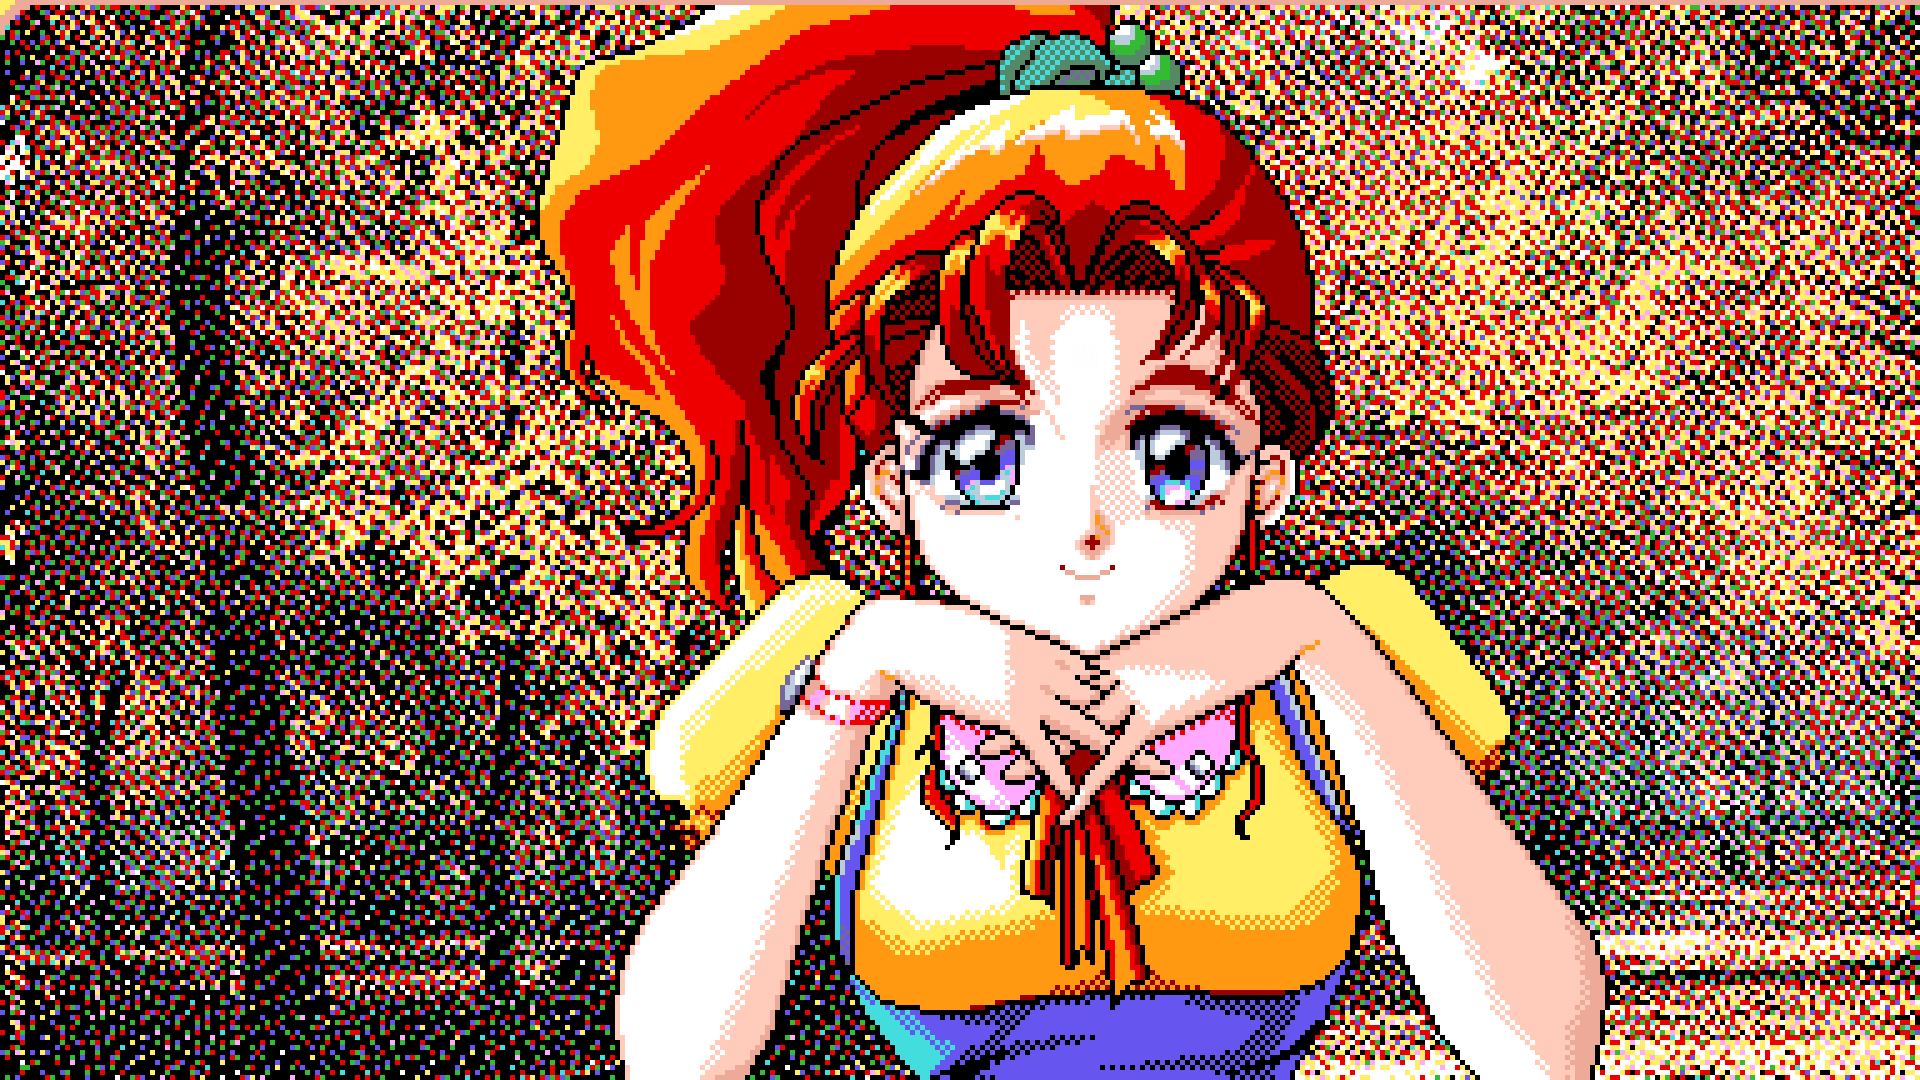 PC 98 Pixel Art Game CG Digital Art Anime Anime Girls Smiling Looking At Viewer Hand On Face Redhead 1920x1080